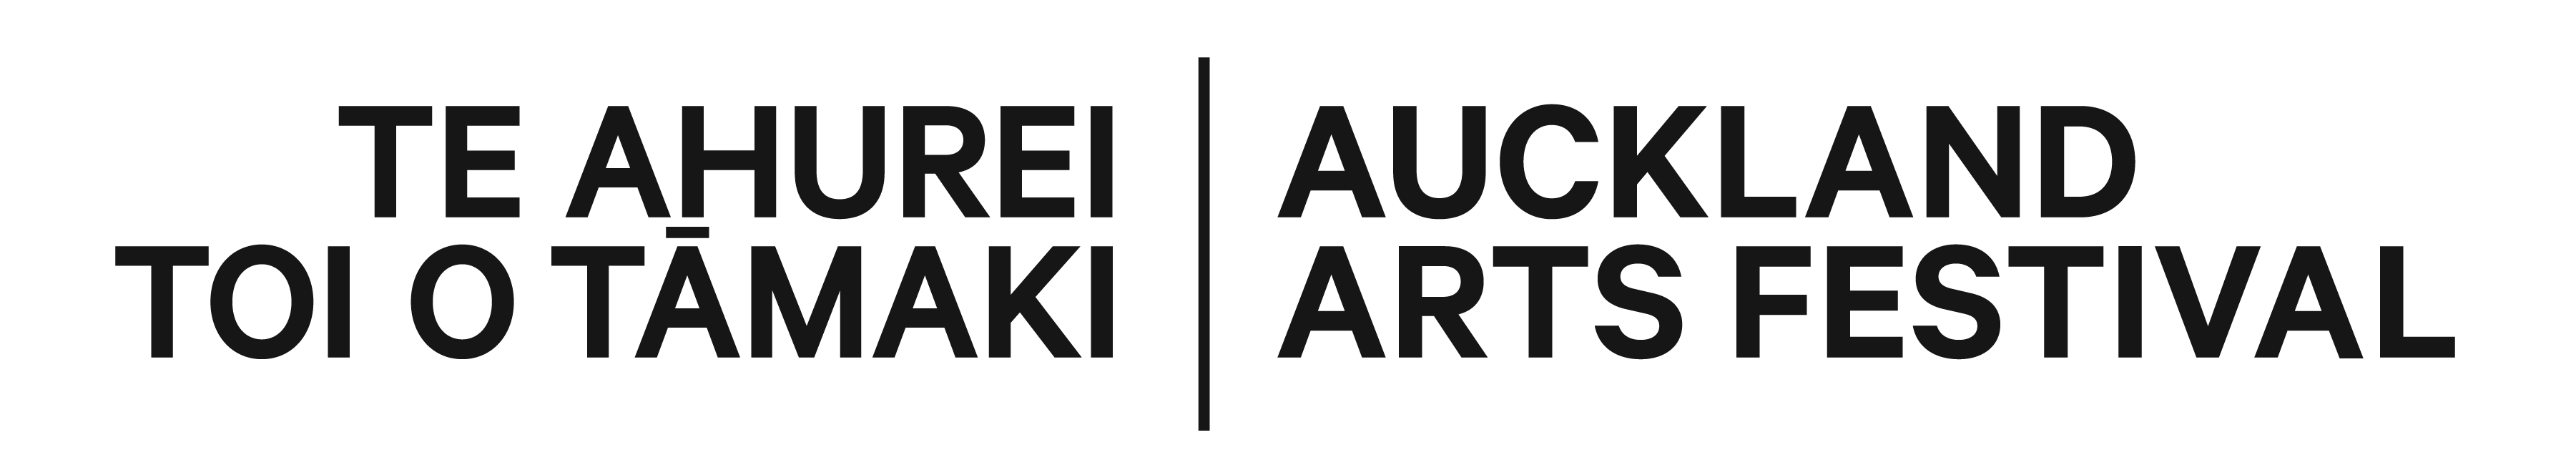 Presented in association with Auckland Arts Festival 2022 Logo